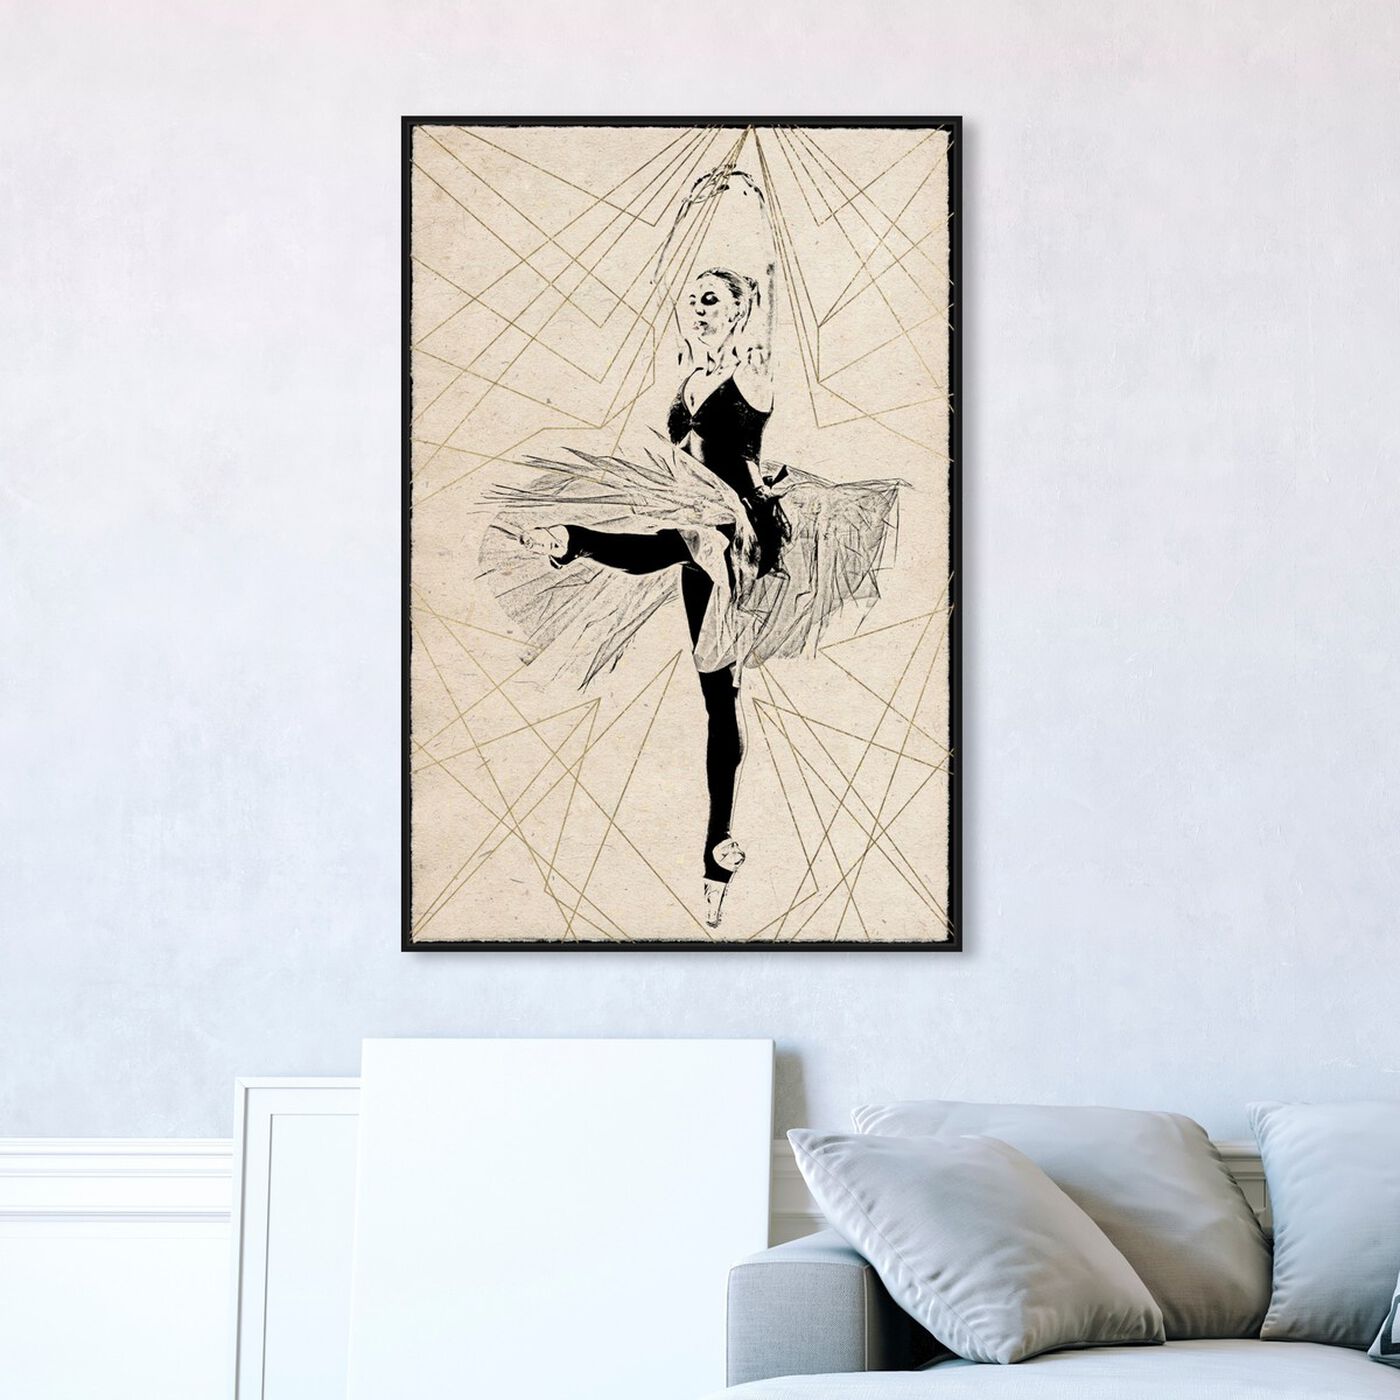 Hanging view of Ballet II Print featuring sports and teams and ballet art.